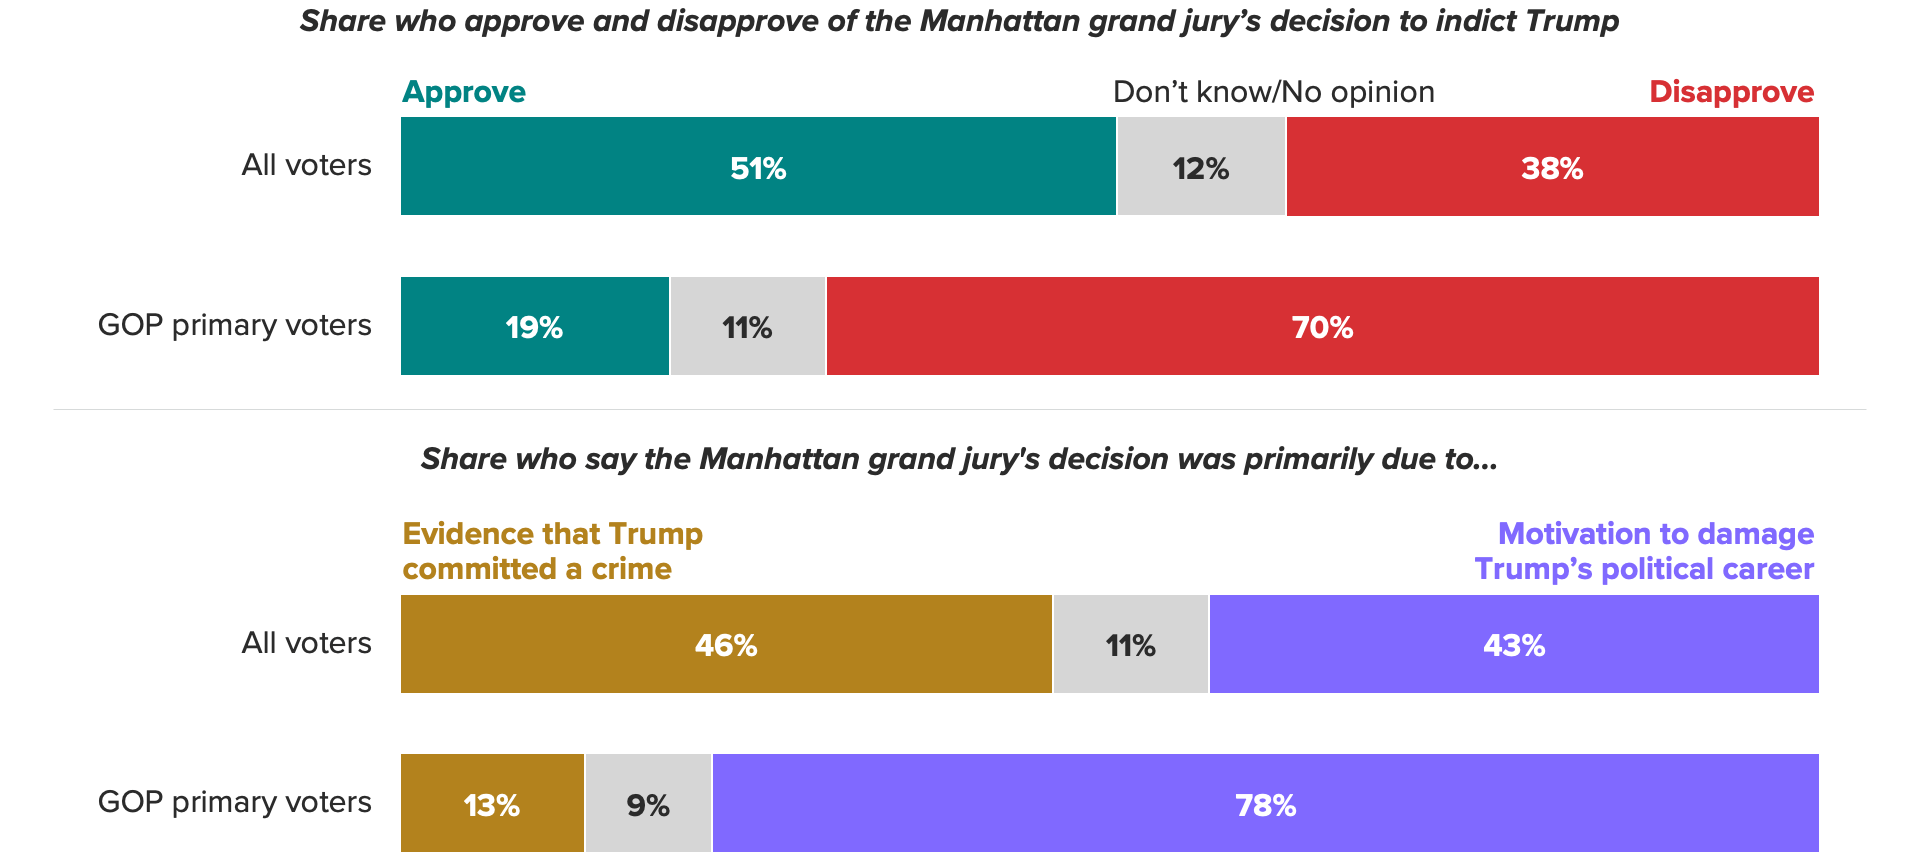 Bar charts of voters' views on the Manhattan grand jury’s decision to indict former President Donald Trump. The chart shows a slim majority of voters (51%) approve of the Manhattan grand jury’s decision to indict Trump.